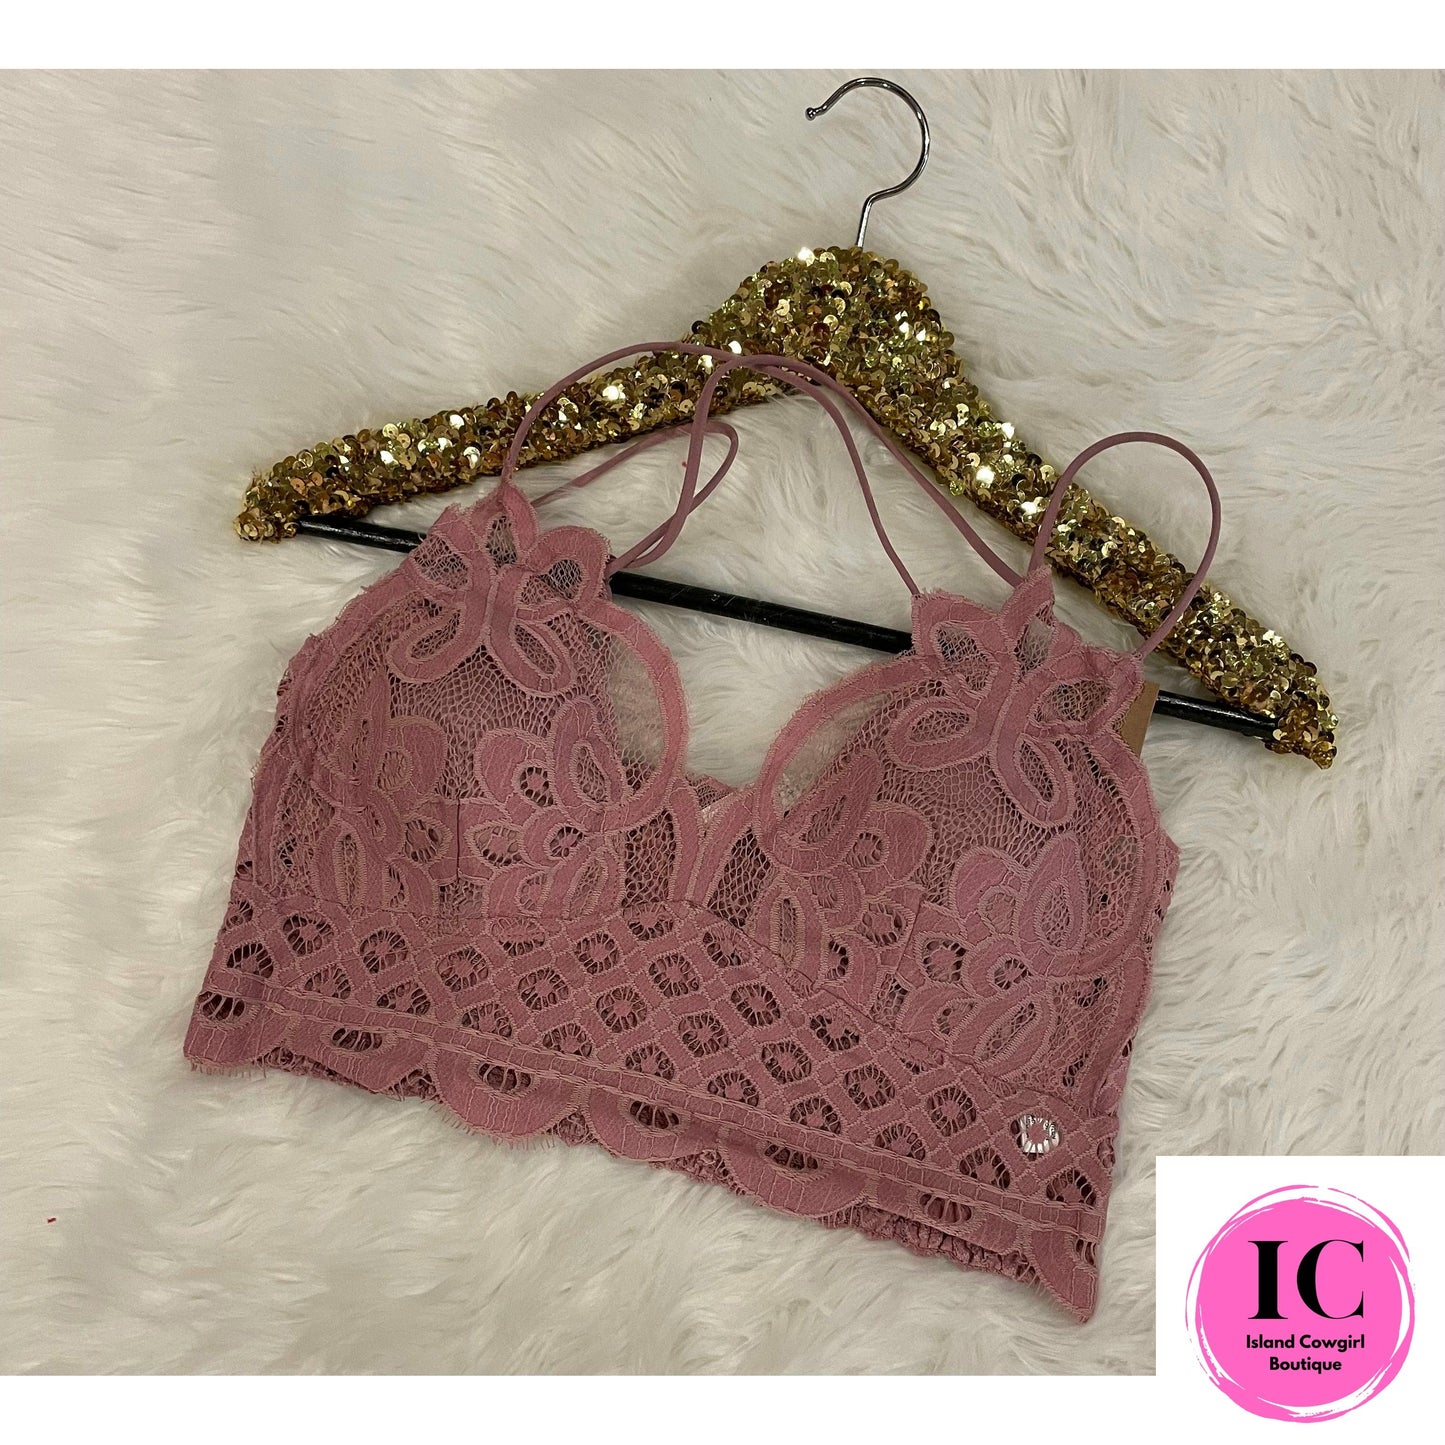 Crochet Lace Bralettes - Island Cowgirl Boutique